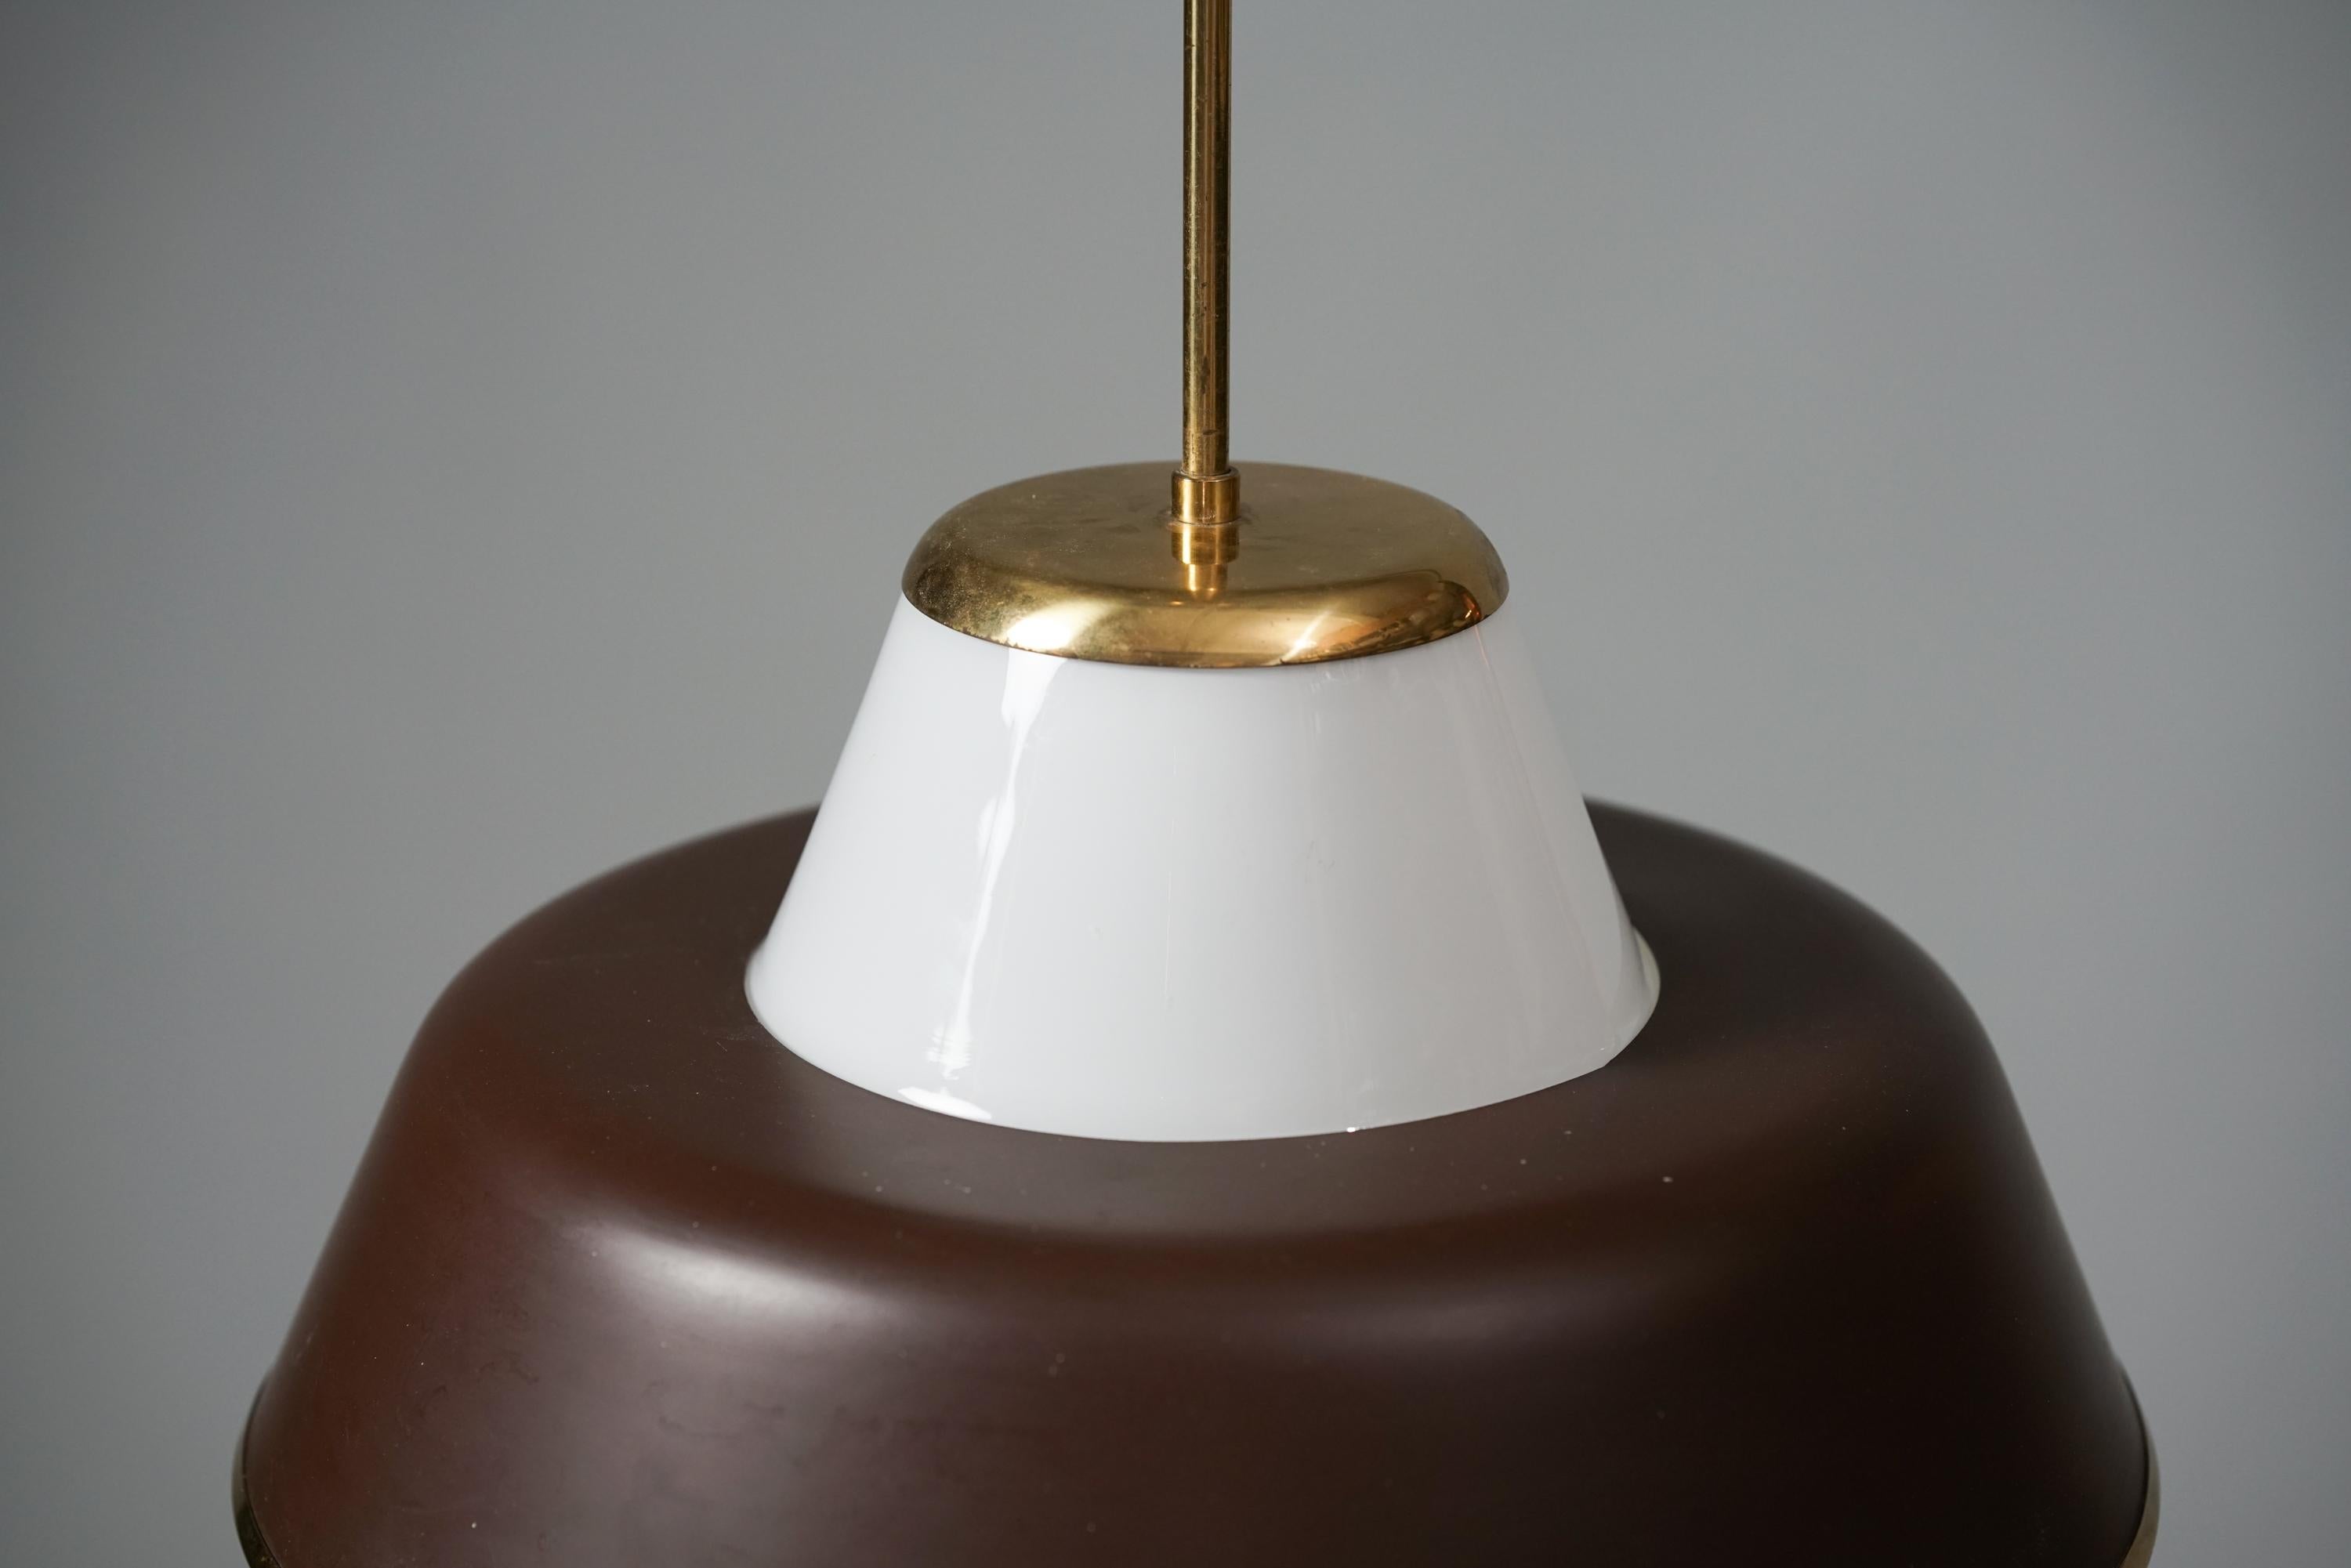 Model 61-347 Pendant by Lisa Johansson-Pape for Orno Oy from the 1950s. Milk glass, brass and metal. Good vintage condition, minor patina and wear consistent with age and use. 

Lisa Johansson-Pape graduated as a furniture designer in 1927 and had a